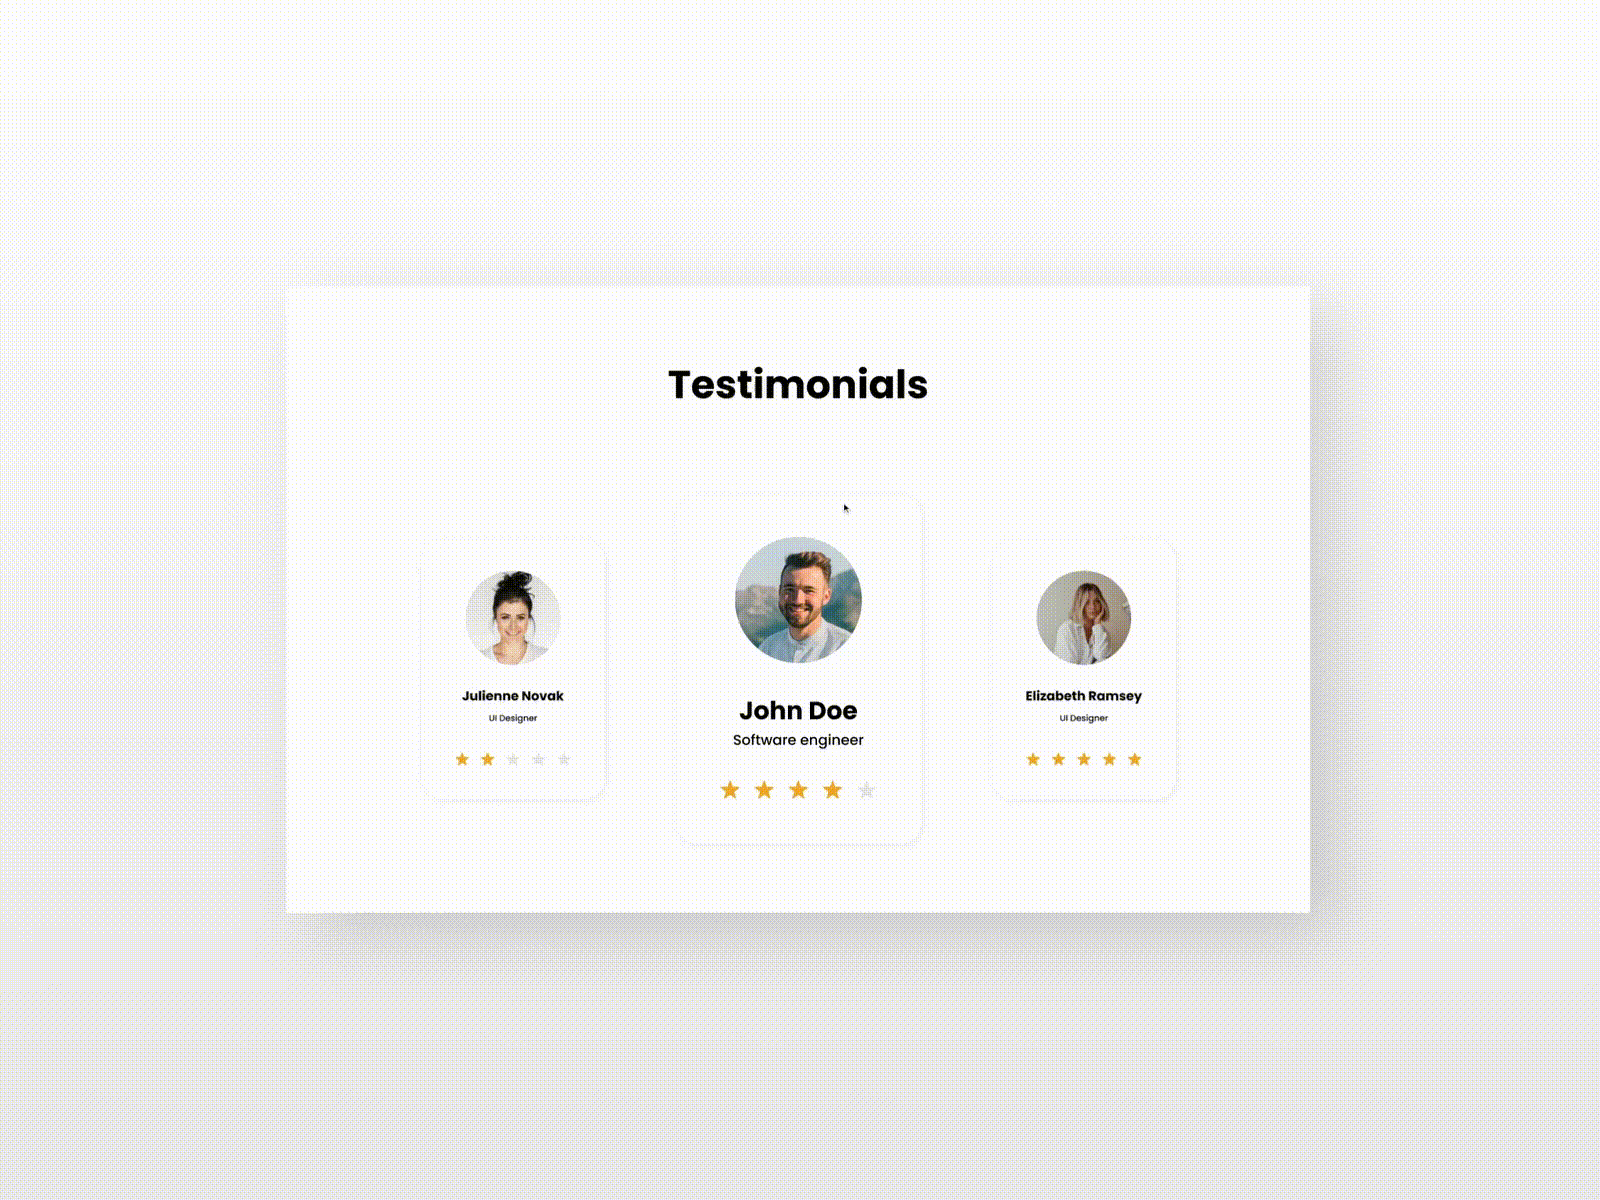 Thirty-ninth day of #DailyUI Challenge app branding dailyui design element figma graphic design opinion opinion ui review review ui site testimonials testimonials element testimonials ui ui uiux ux website website element